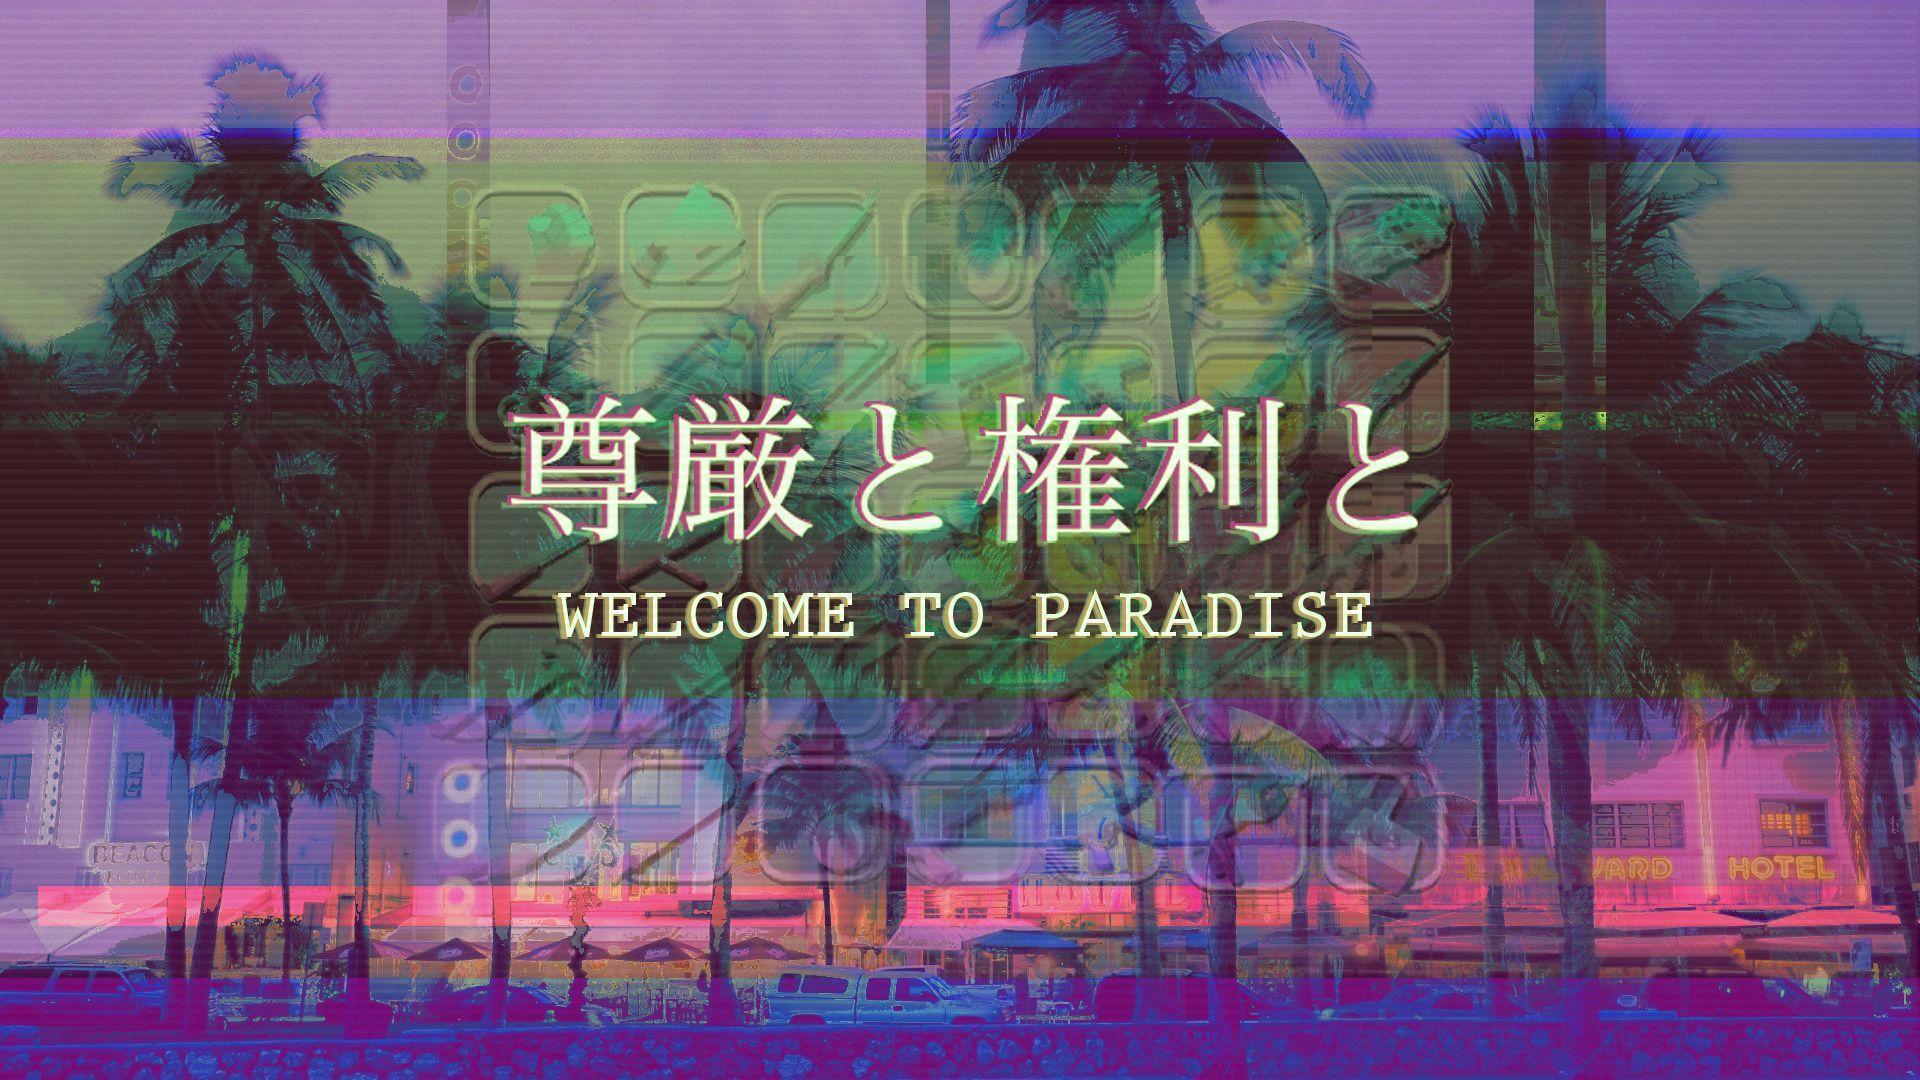 Aesthetic wallpaper with the text 